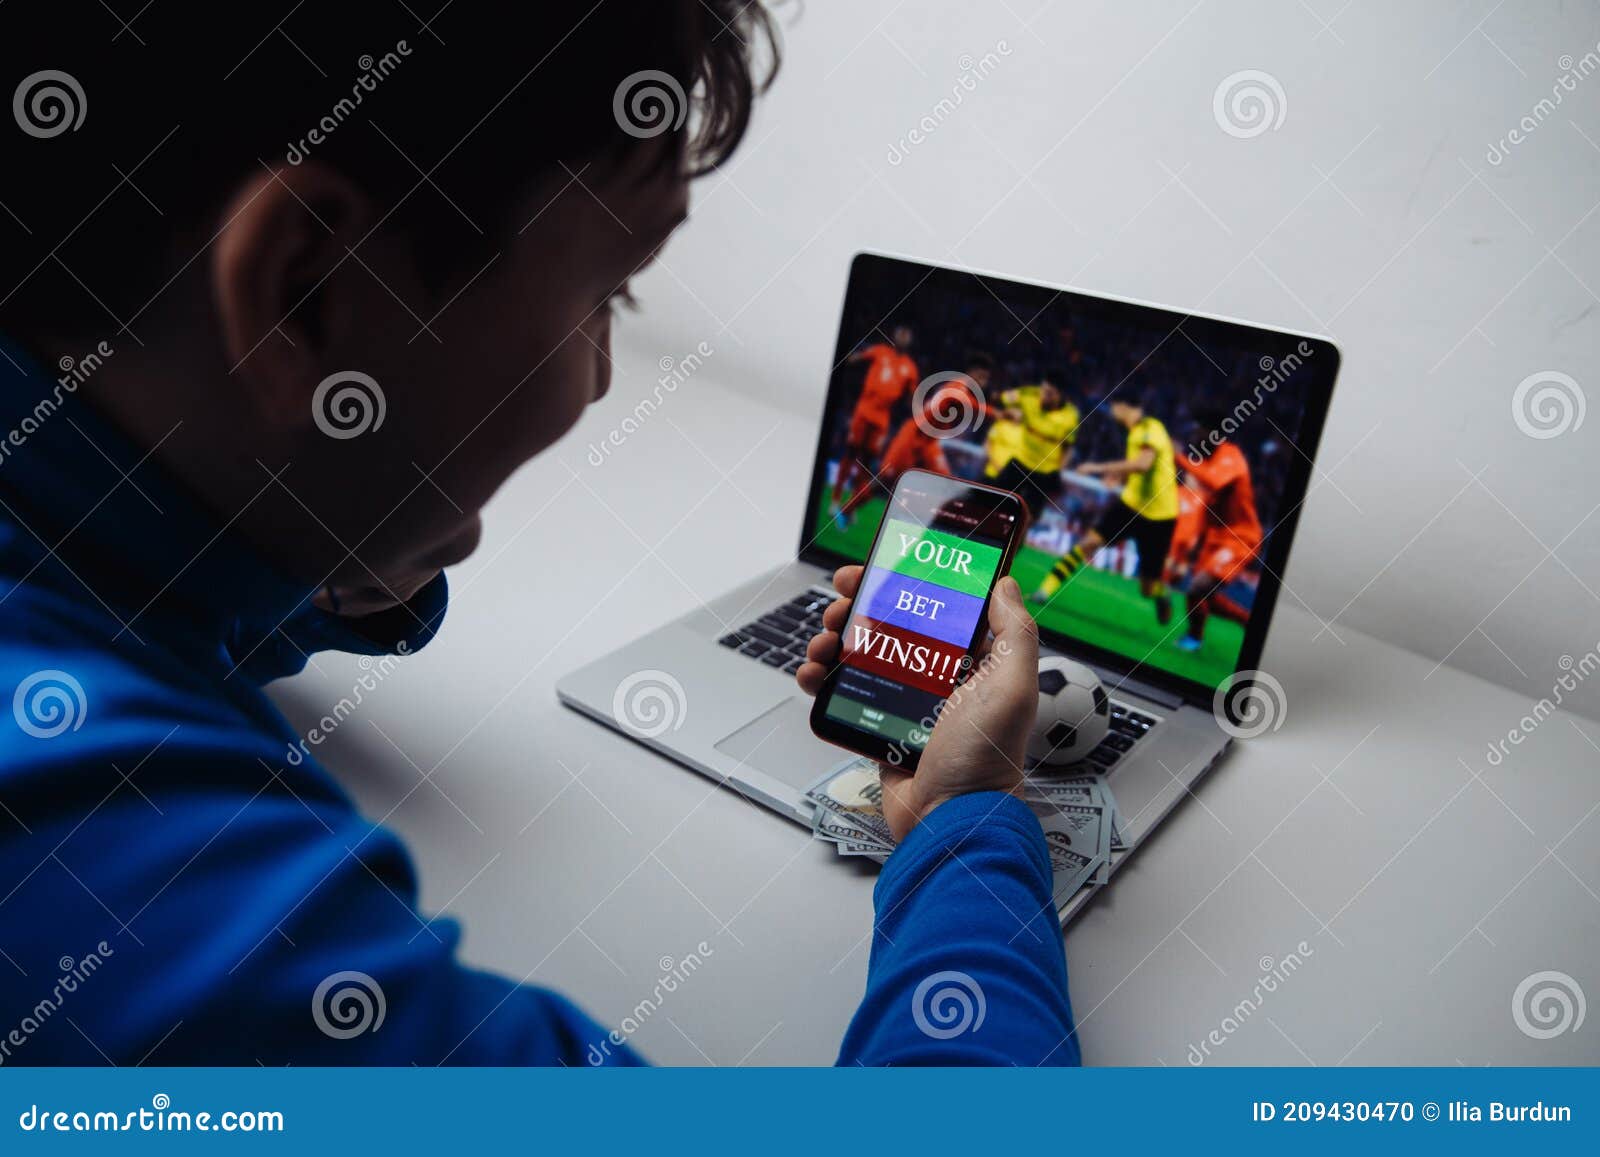 Man Watching Football Online Broadcast on His Laptop and Celebrate Victory in Betting at Bookmaker S Website